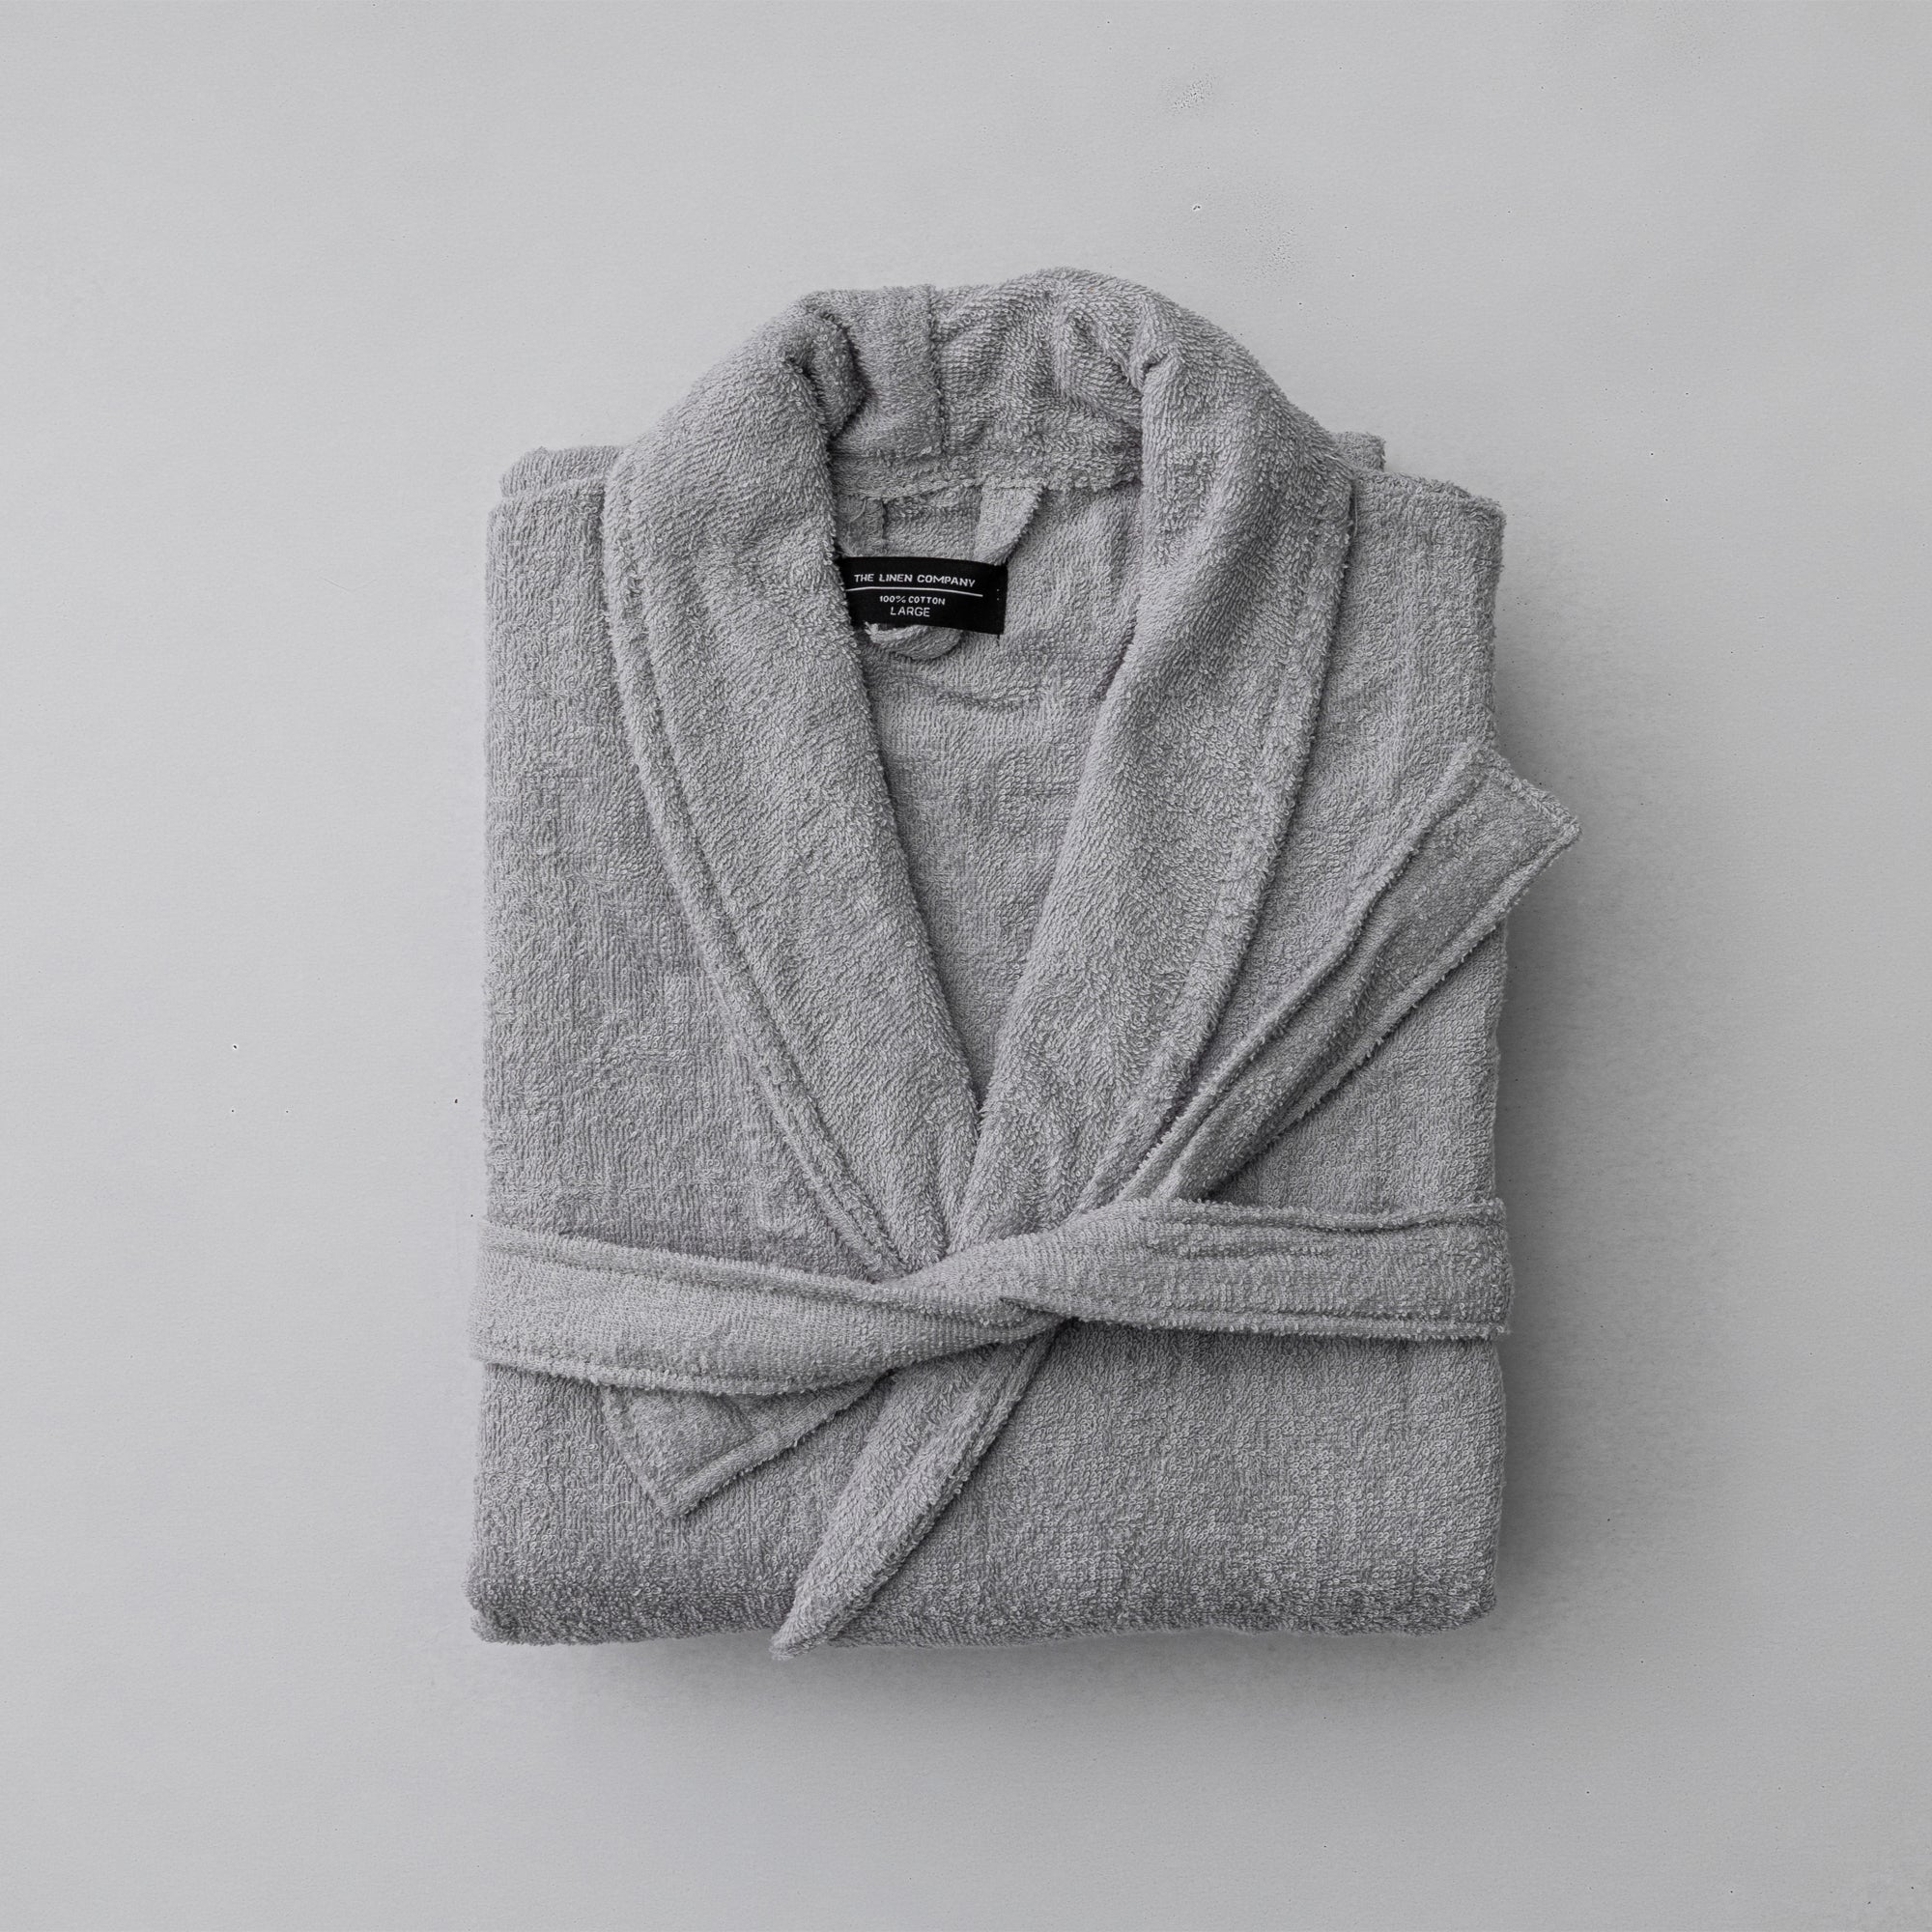 The Linen Company Accessories Large Light Grey Collared Bathrobe